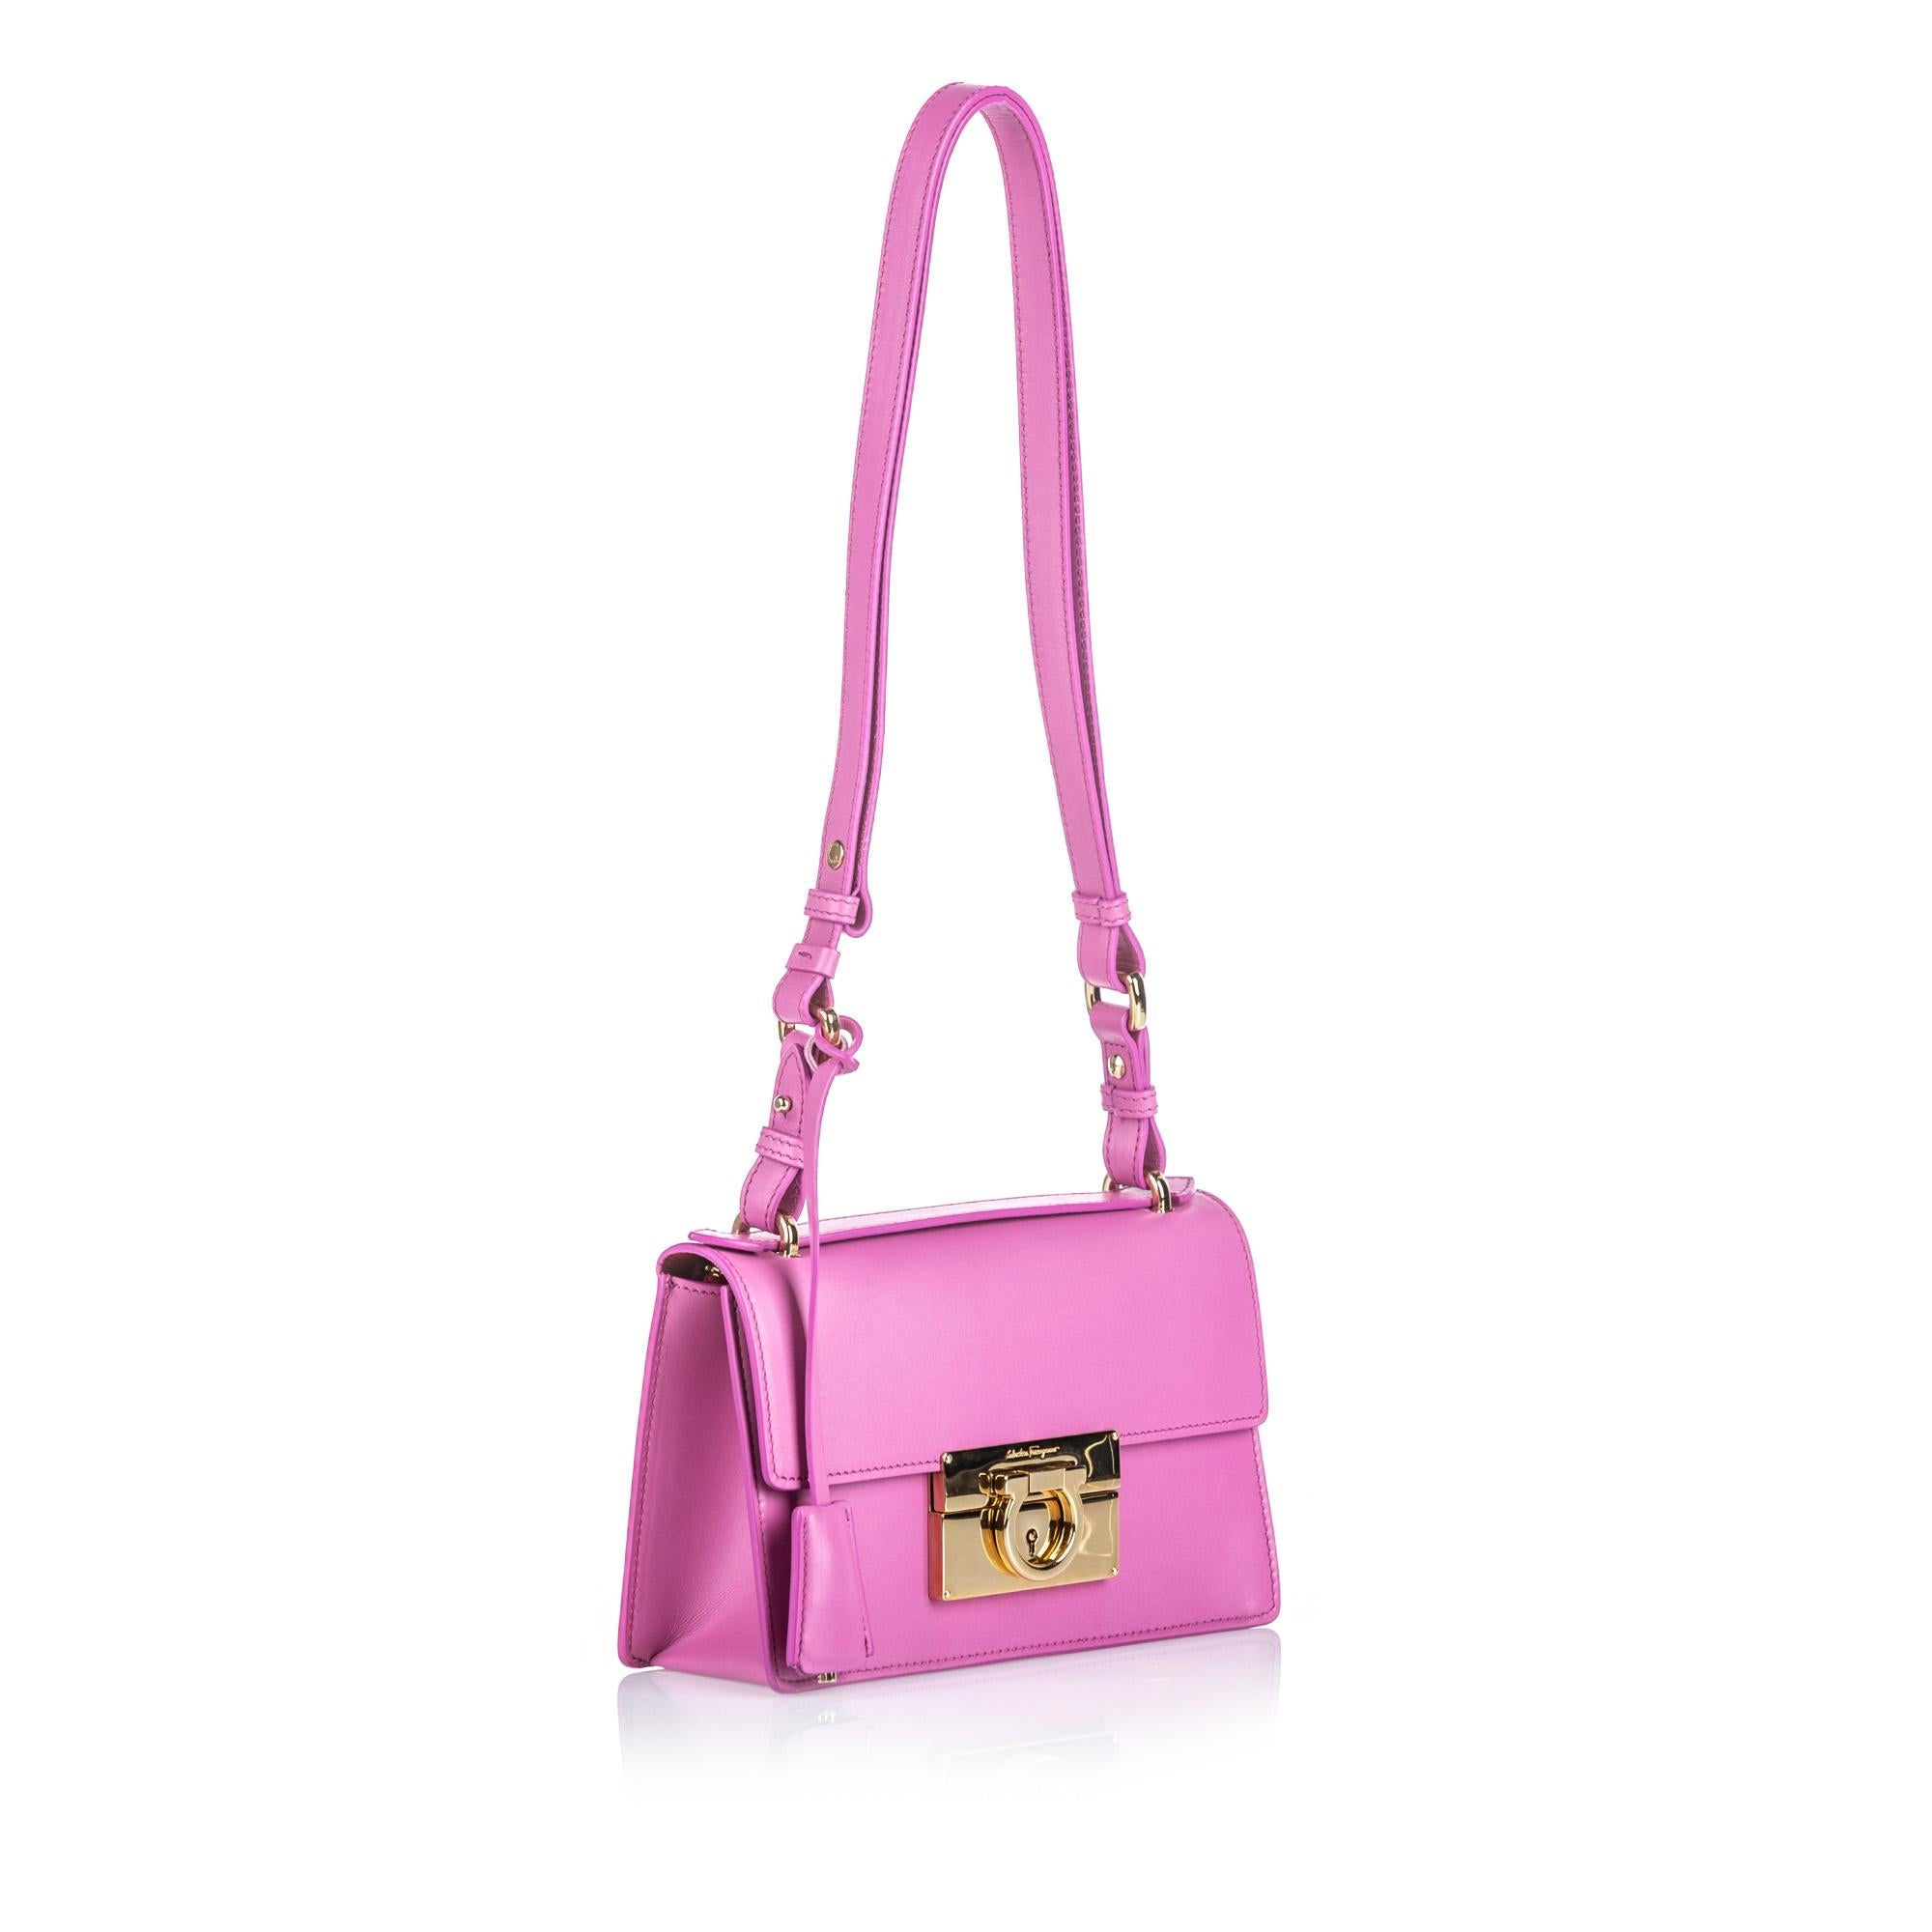 This Aileen features a leather body, flat strap, flat top handle, top flap with flip lock closure, and interior zip pocket. It carries as A condition rating.

Inclusions: 
Dust Bag
Box
Dimensions:
Length: 20.00 cm
Width: 8.00 cm
Depth: 6.00 cm
Hand